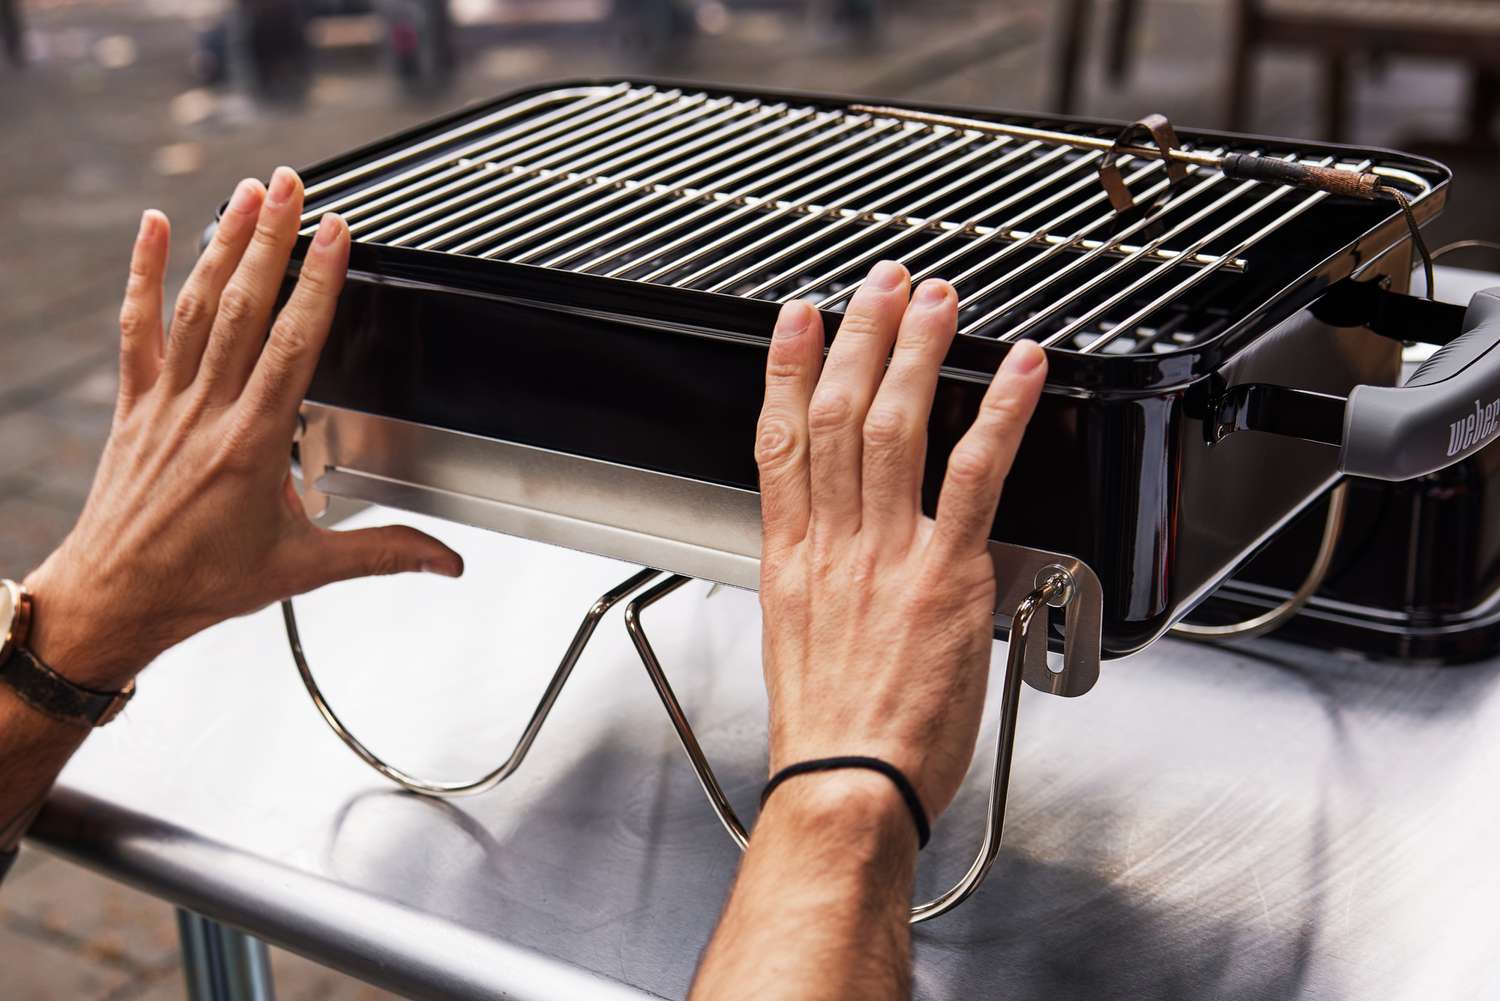 Hands touching the Weber Go-Anywhere Charcoal Grill displayed on a table 